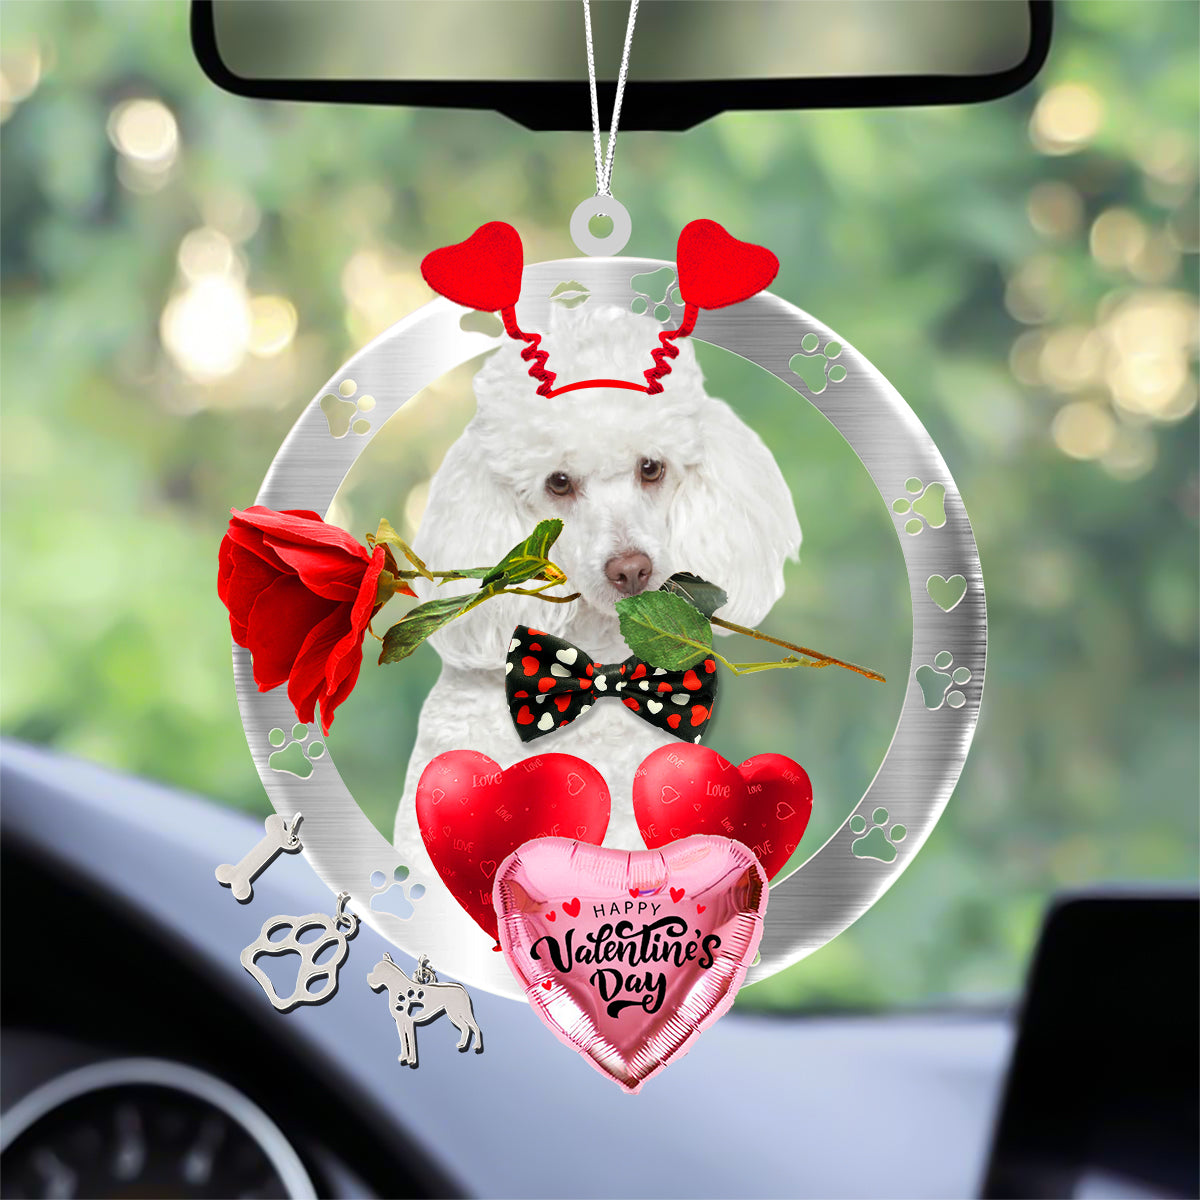 Poodle With Rose & Heart Balloon Ornament